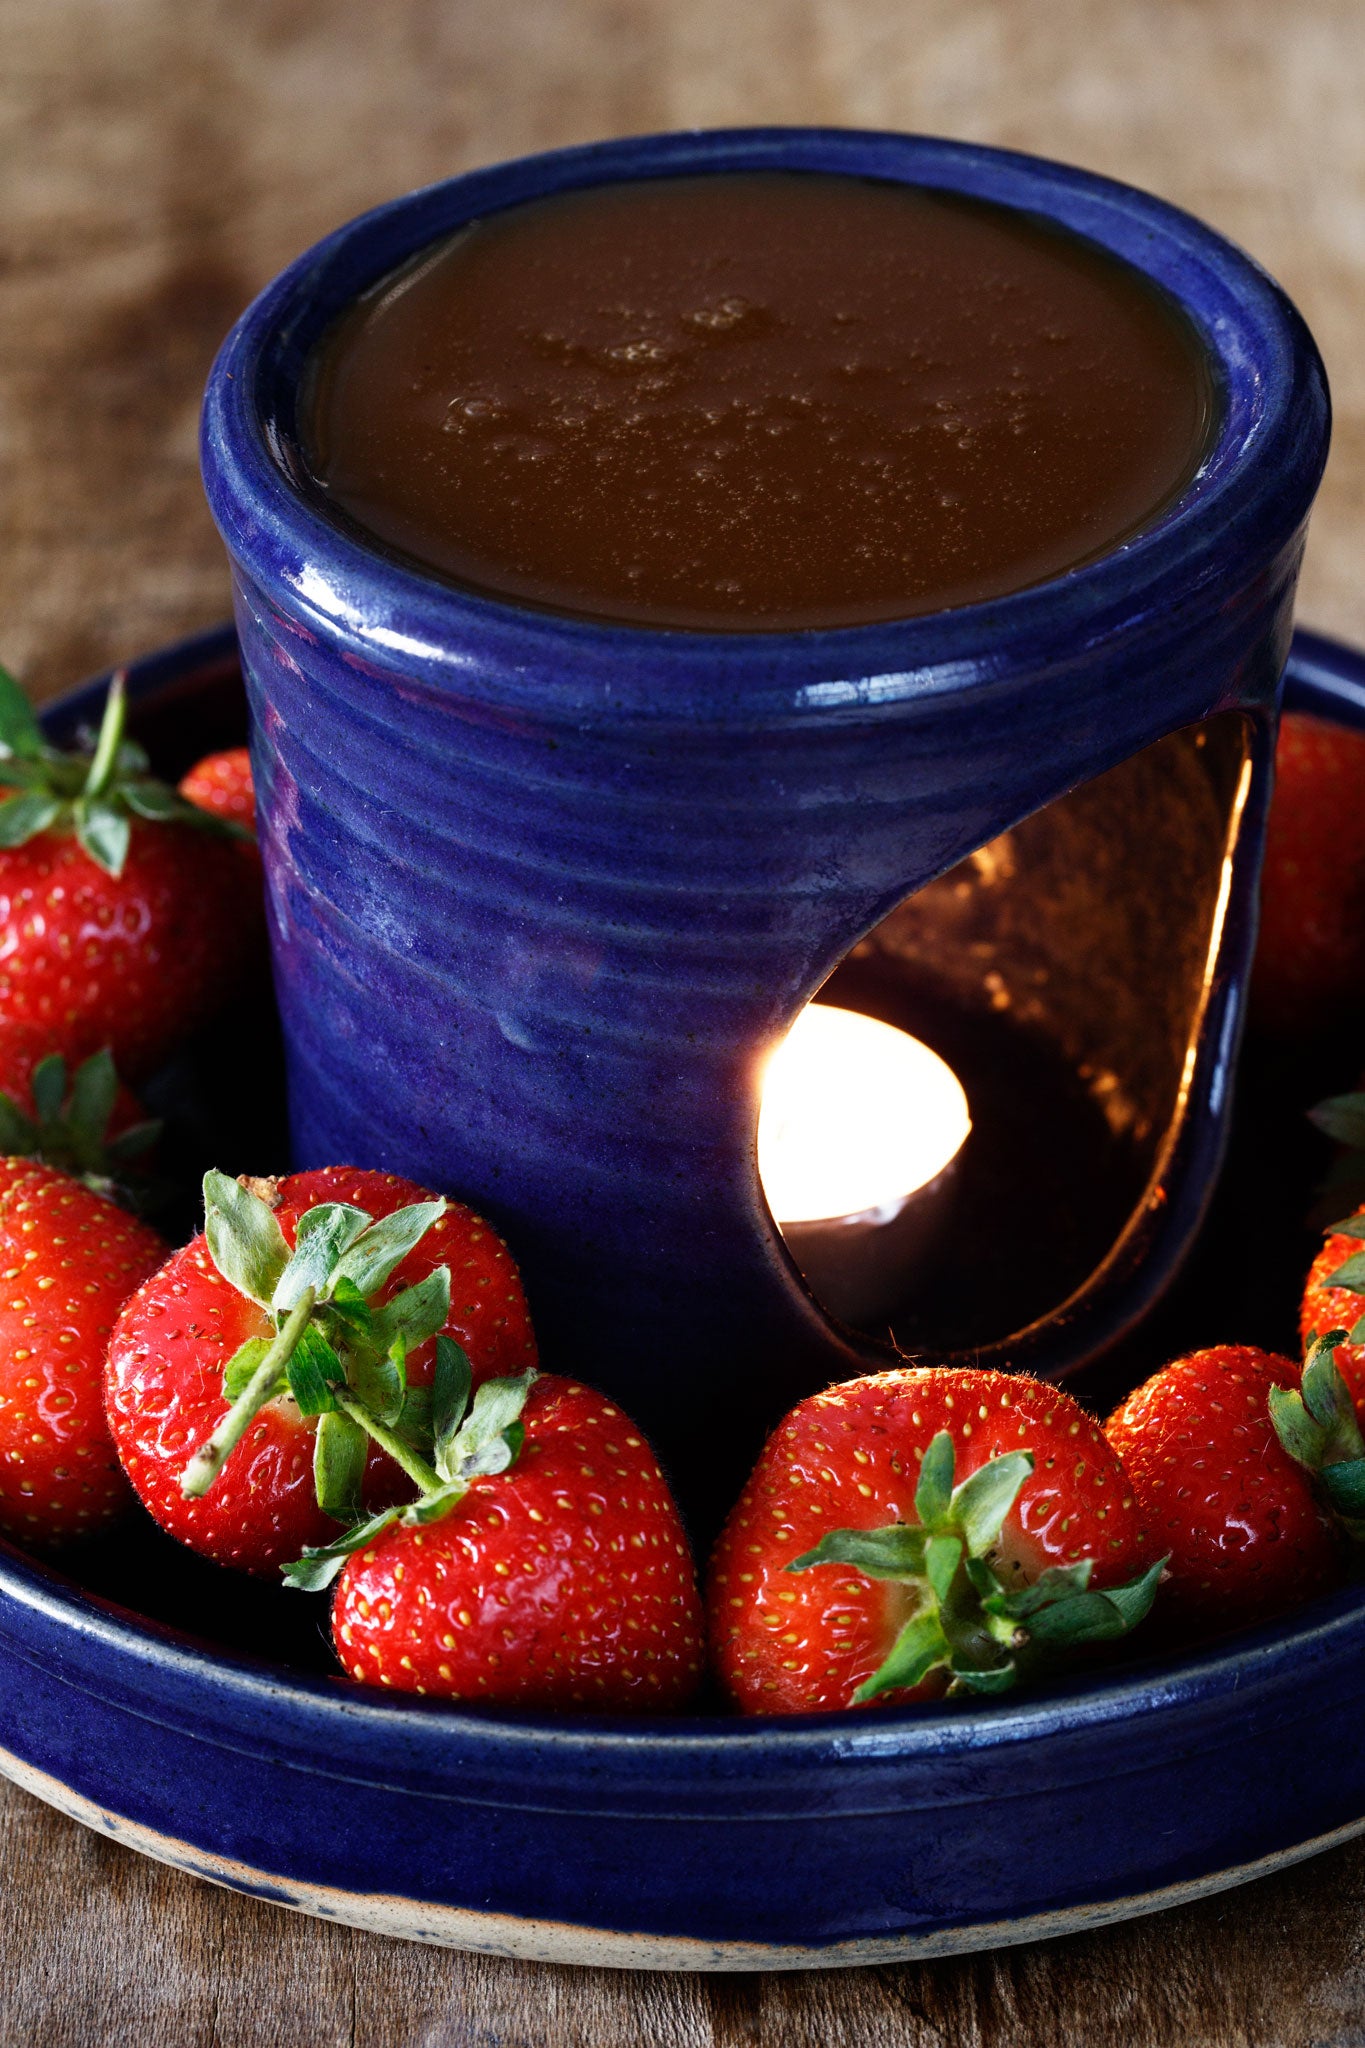 Great sharing dish: Strawberries with salted caramel fondue